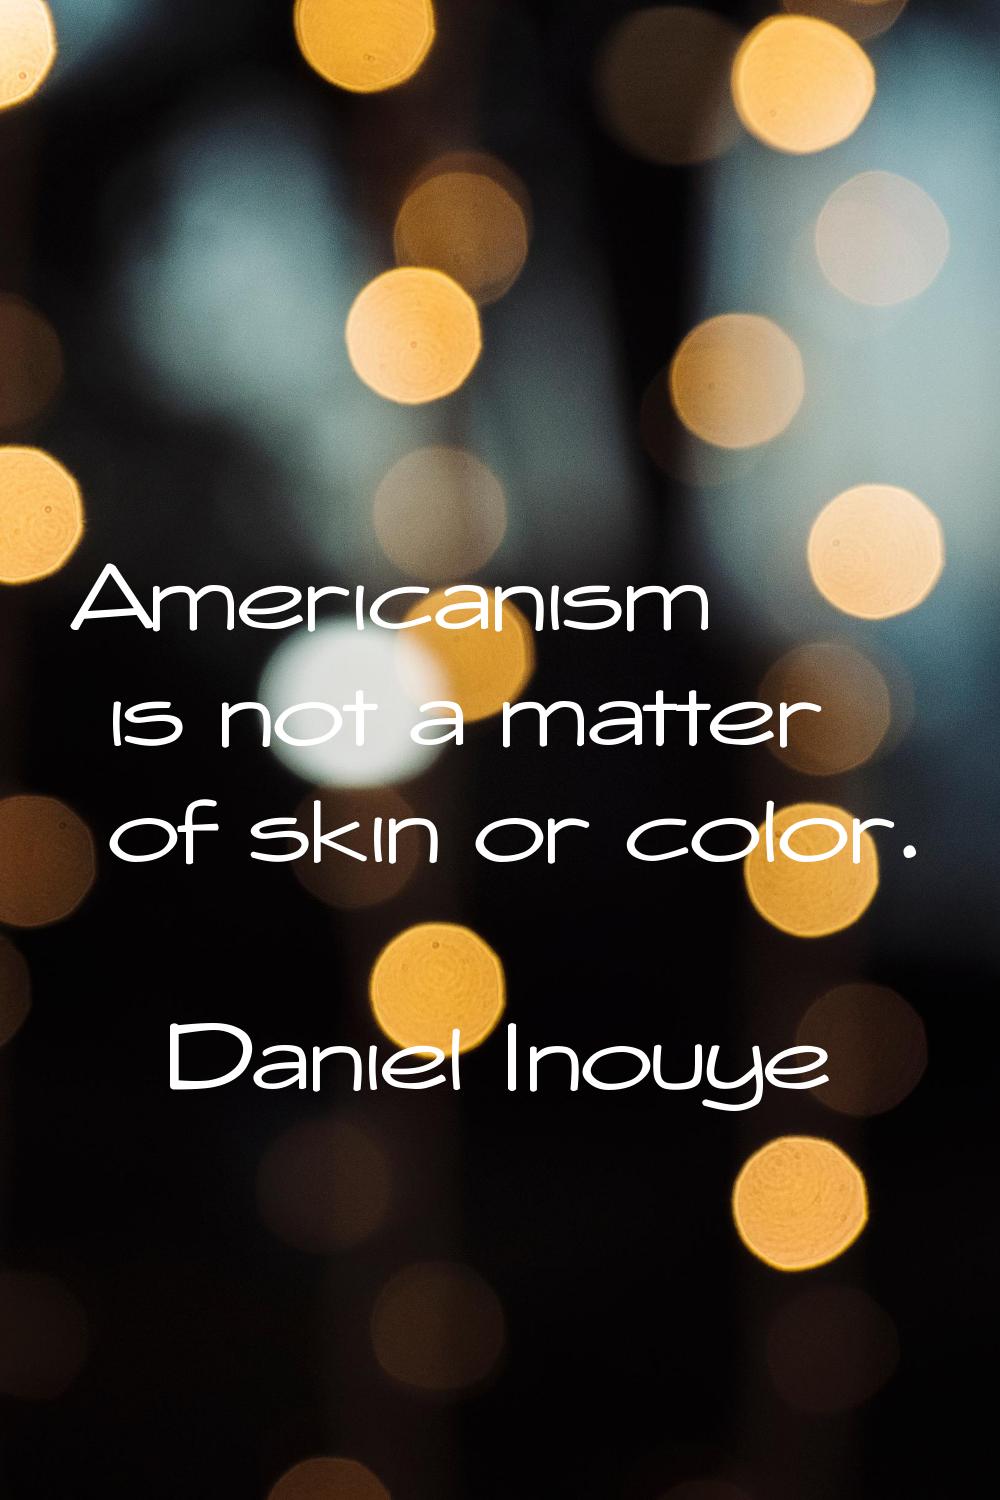 Americanism is not a matter of skin or color.